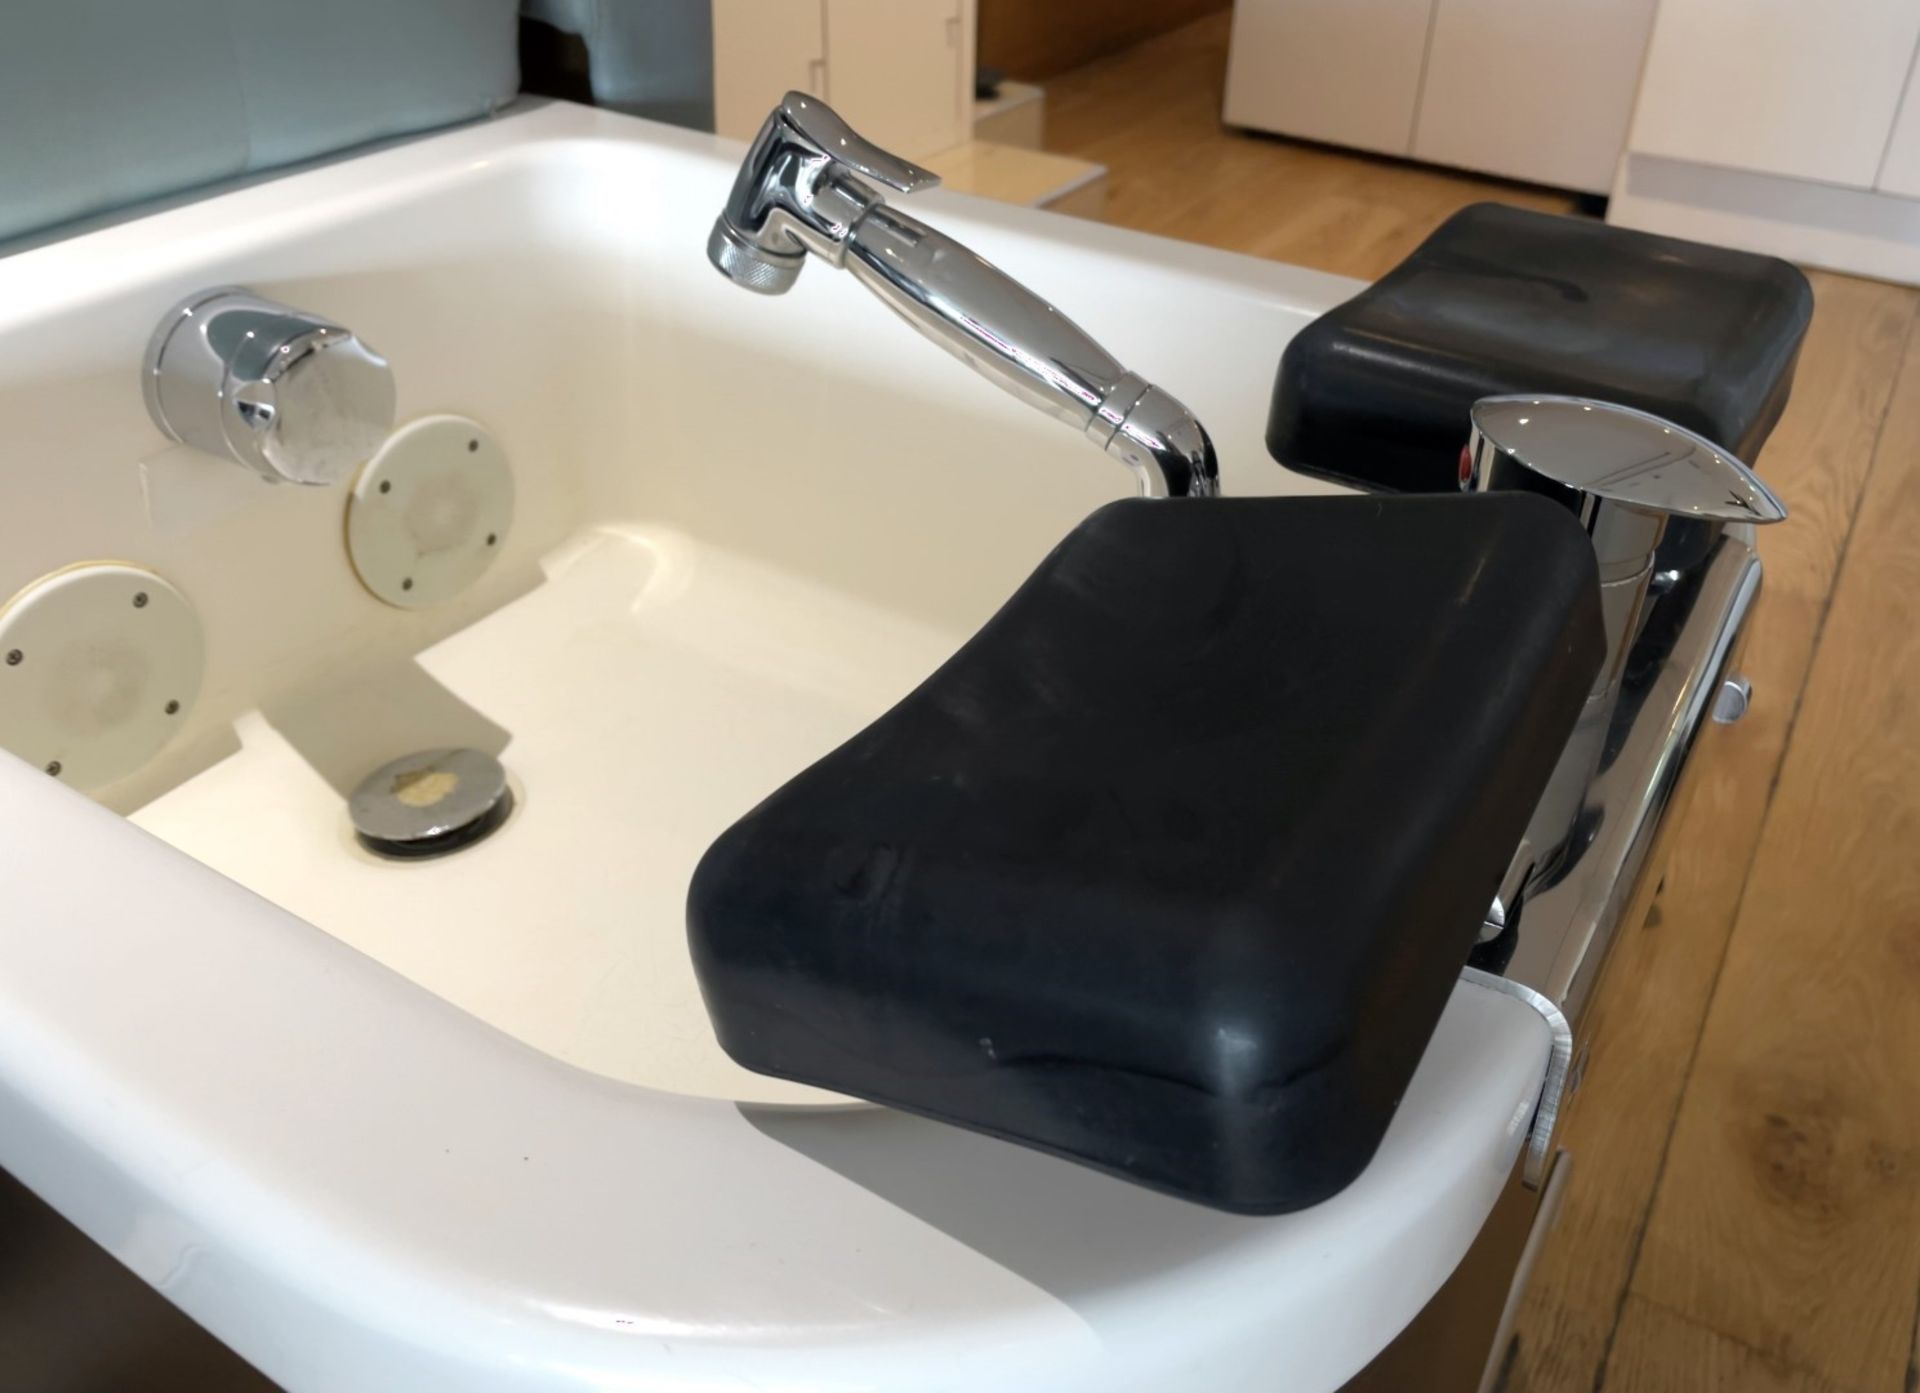 1 x NILO Professional Salon Pedicure Spa Chair With Massage Function - Includes Remote Control - Image 13 of 19